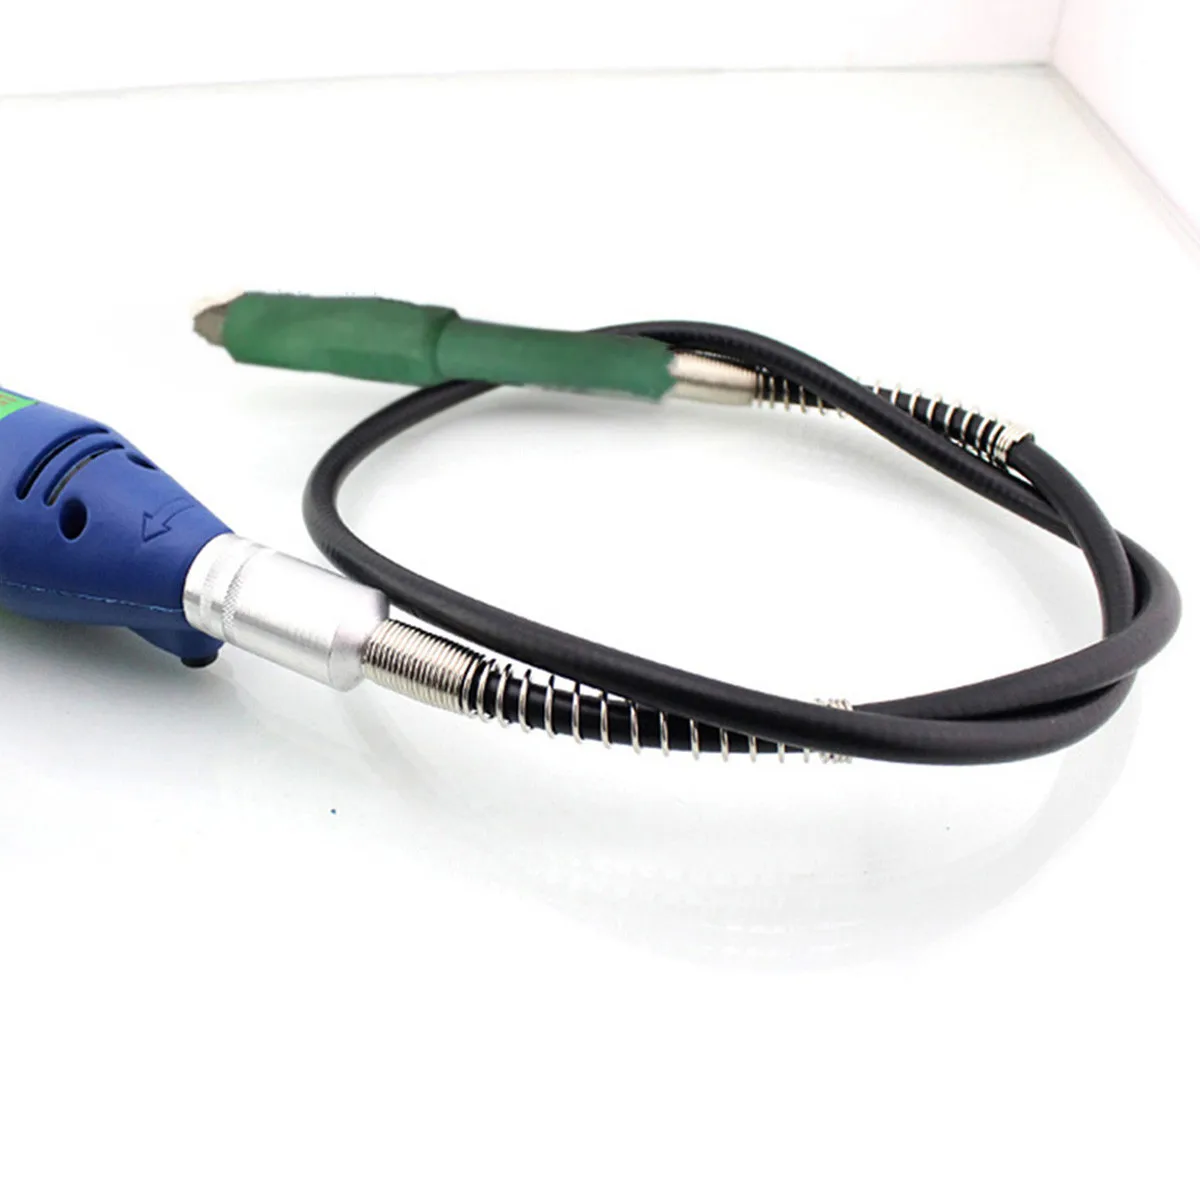 

42'' 107cm Corded Electric Flexible Shaft For Power Rotary Tools Accessories M19x2 interface size